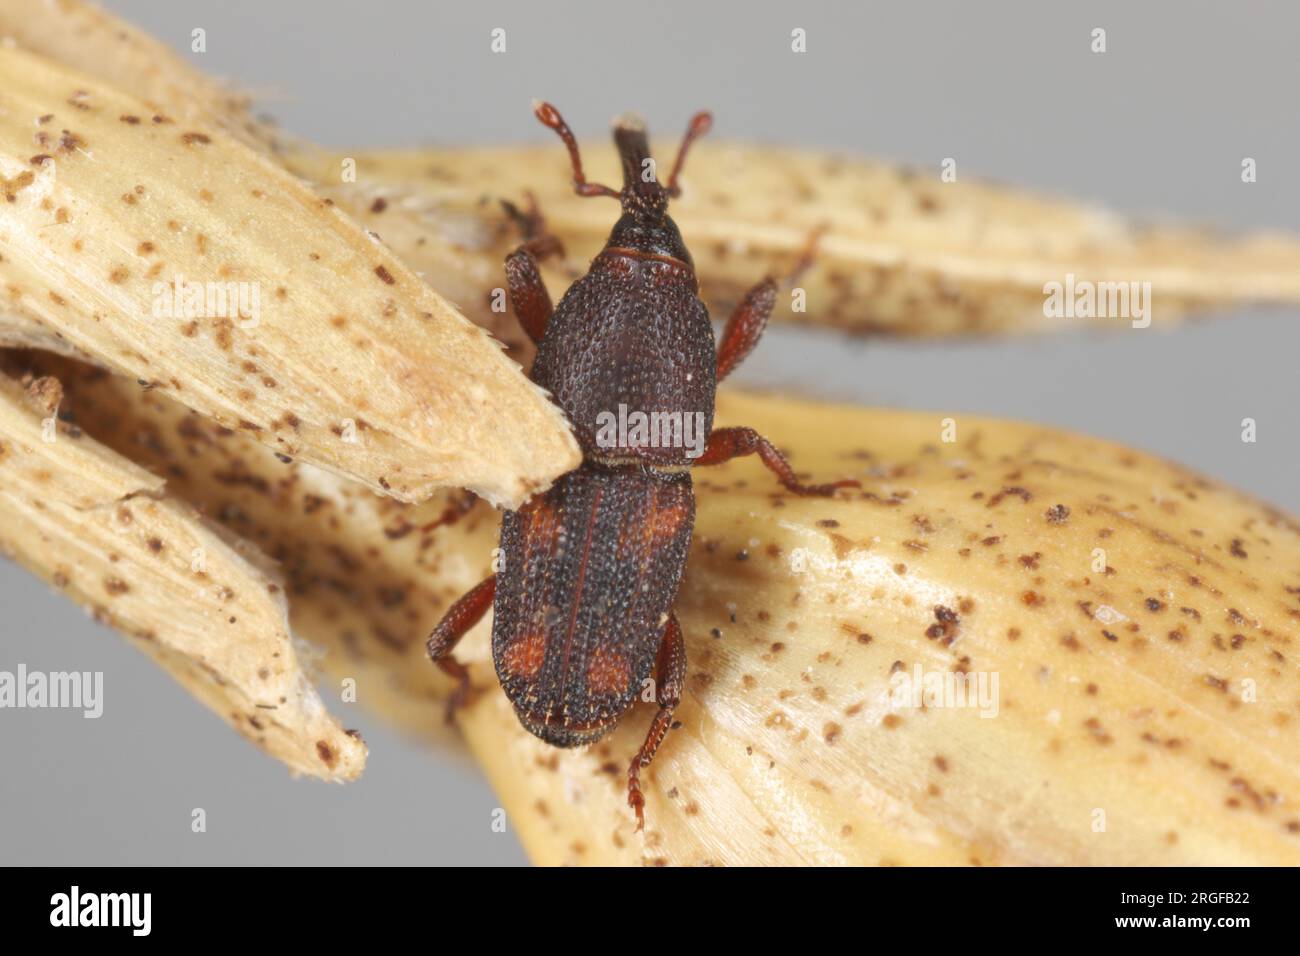 Rice weevil (Sitophilus oryzae), on a fragment of an ear of cereal. Stock Photo